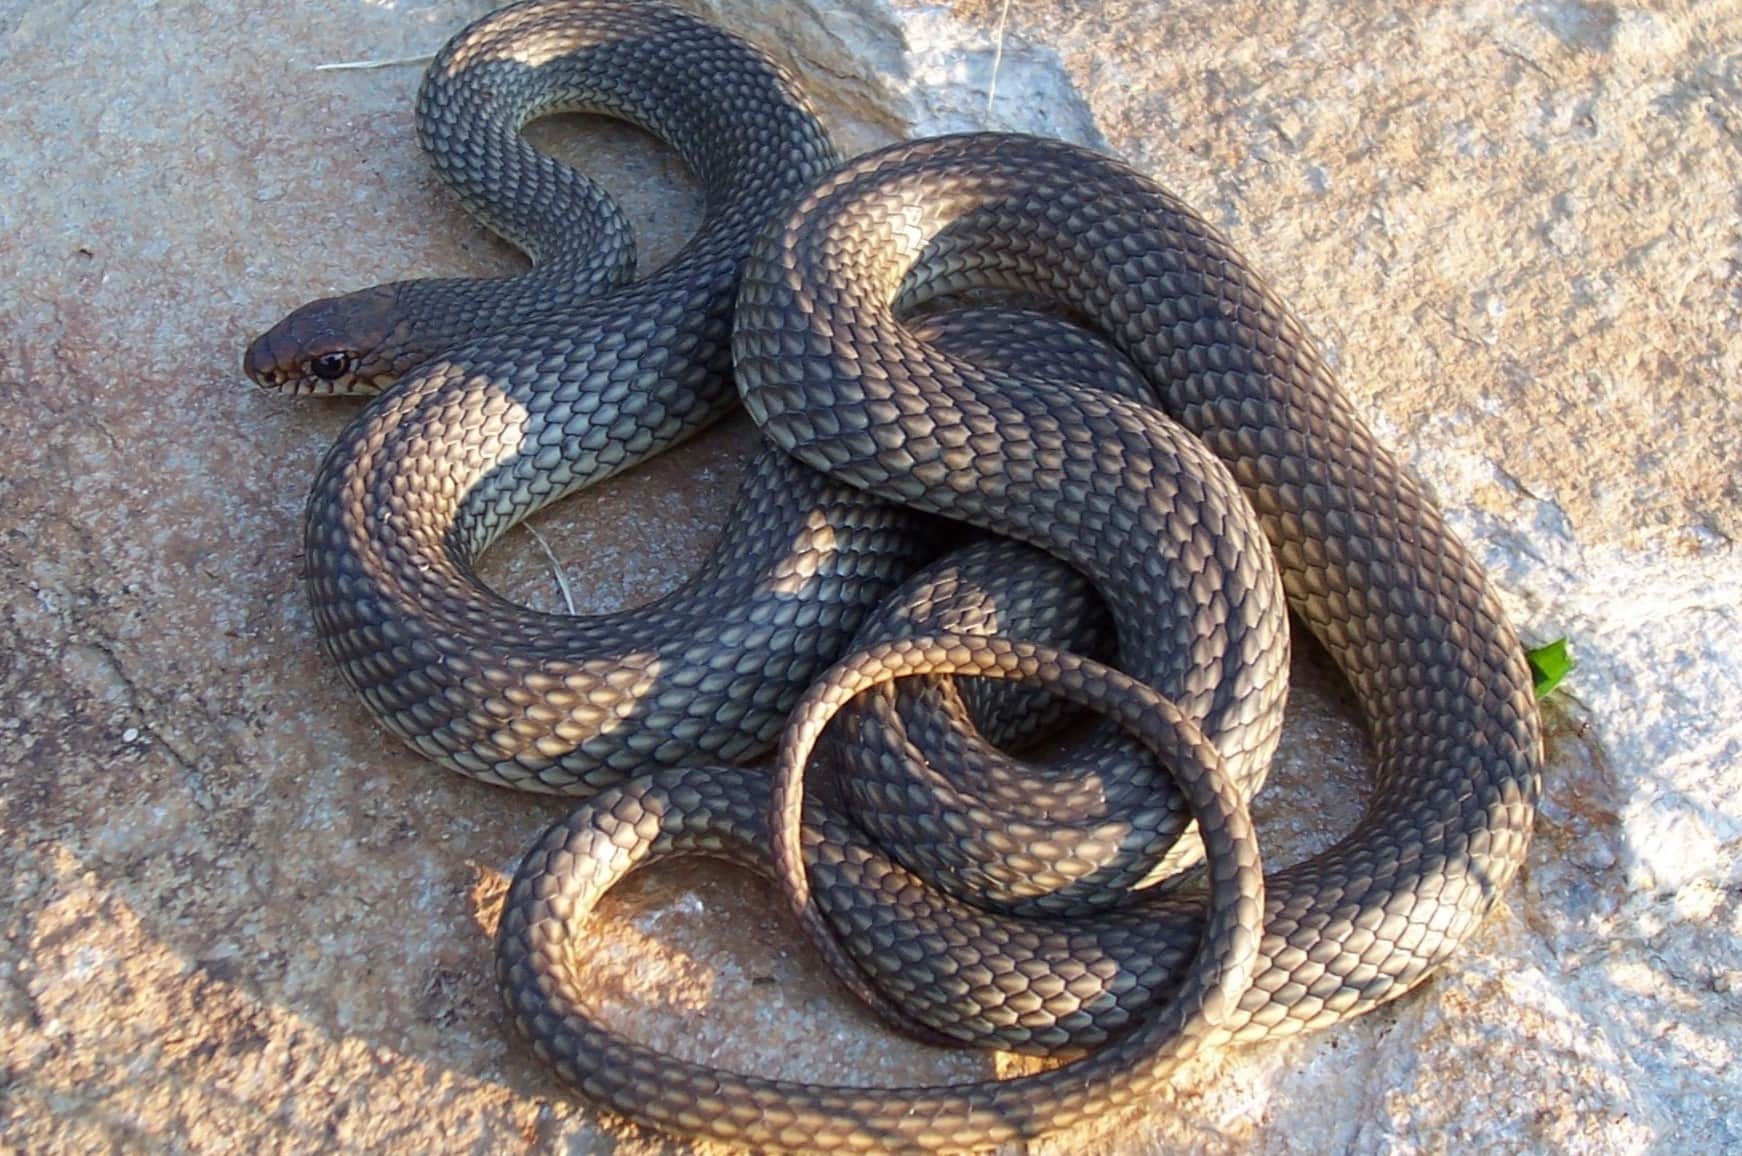 13 Astonishing Facts About Caspian Whip Snake - Facts.net